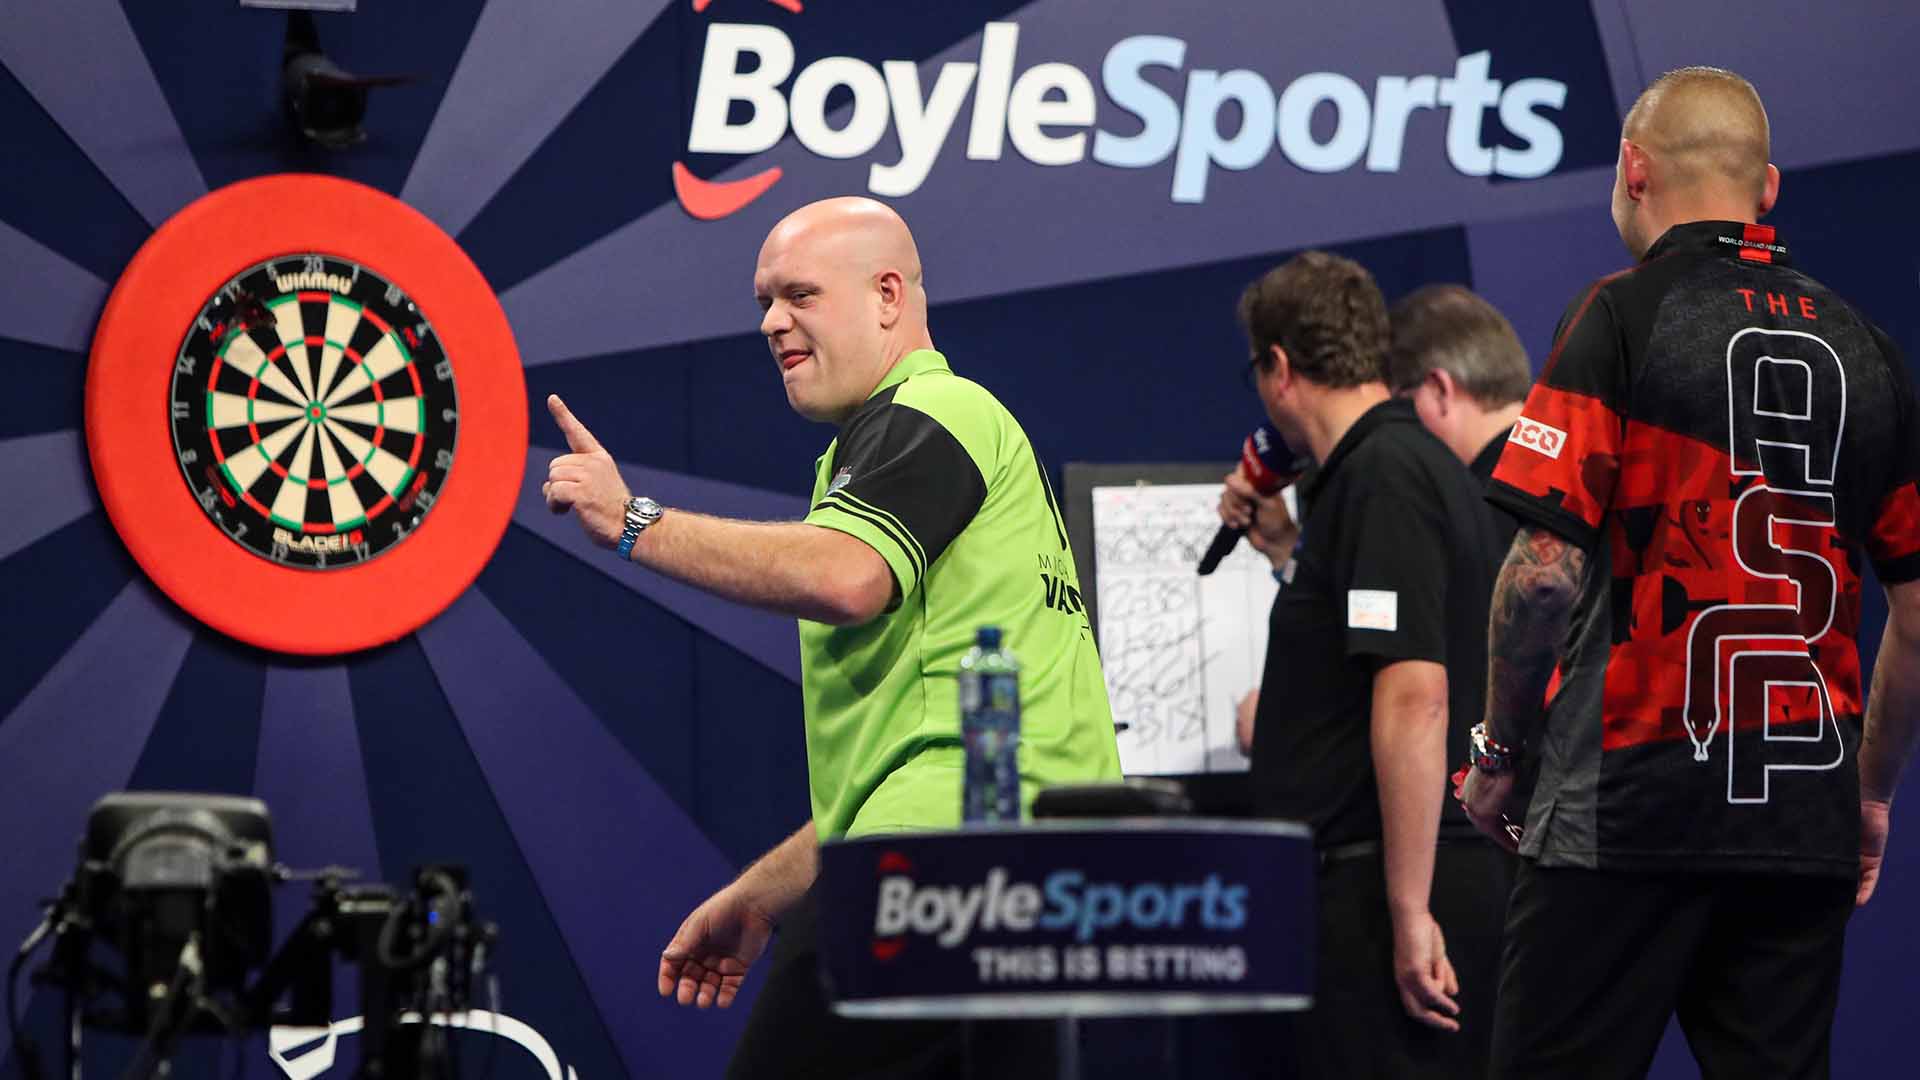 World Grand Prix darts 2022 Draw, schedule, betting odds, results and live Sky Sports TV coverage details